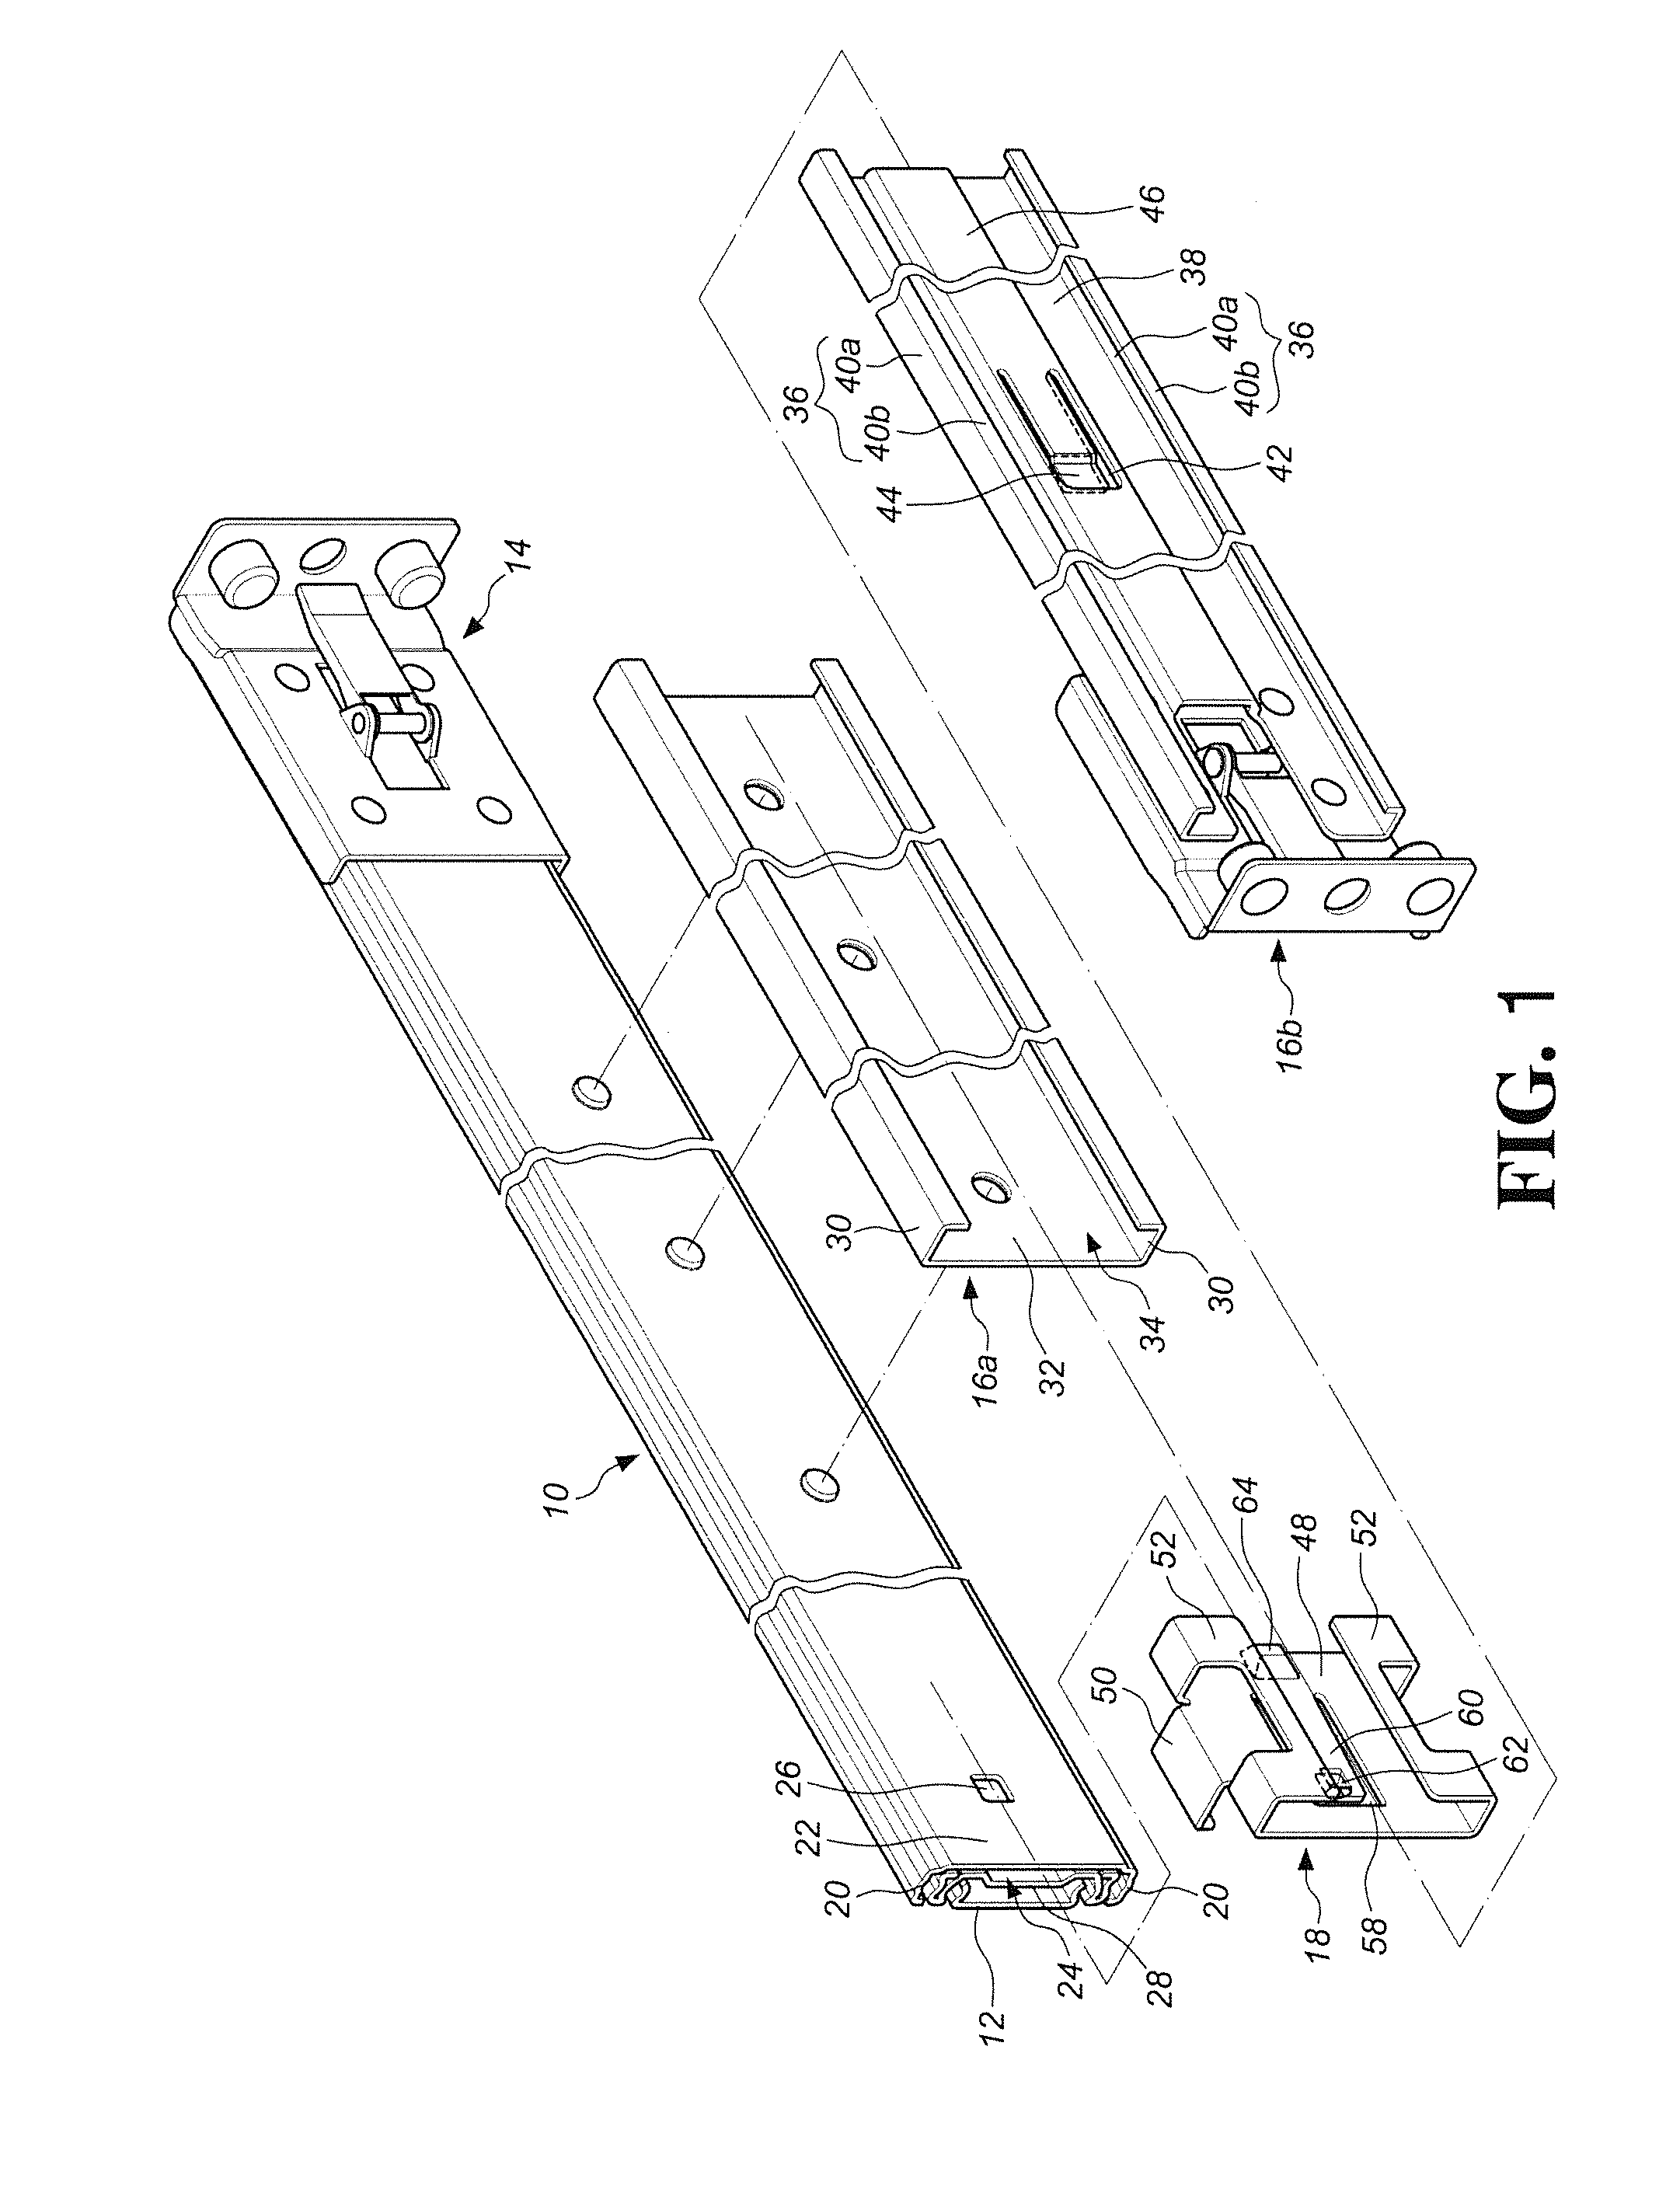 Slide rail assembly for use in rack system and reinforcement member thereof